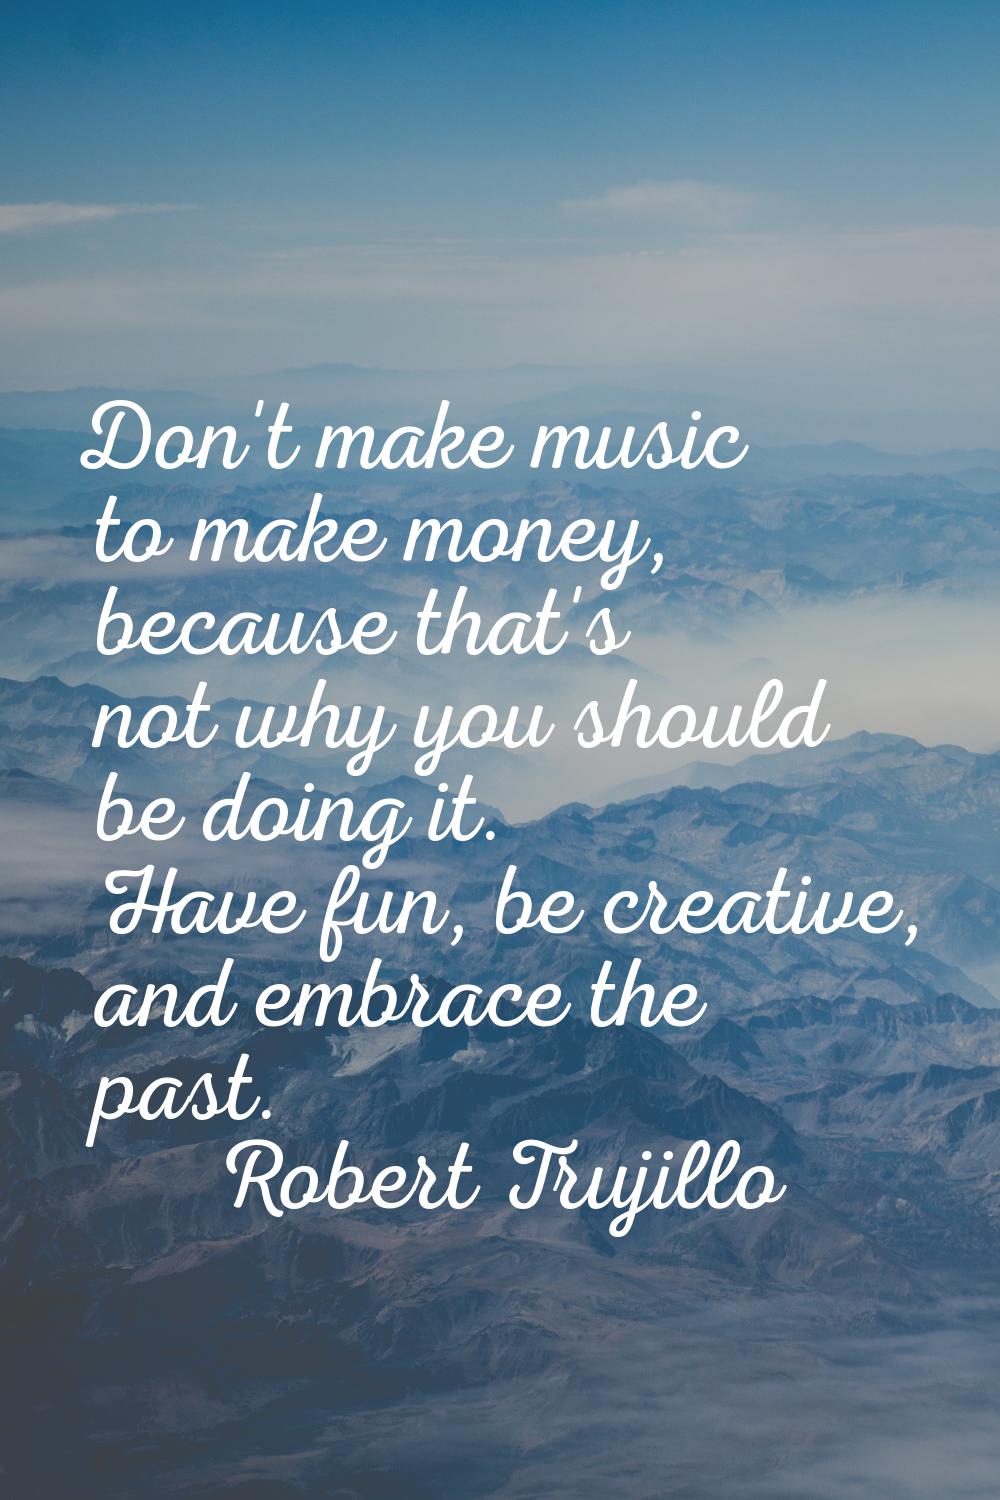 Don't make music to make money, because that's not why you should be doing it. Have fun, be creativ